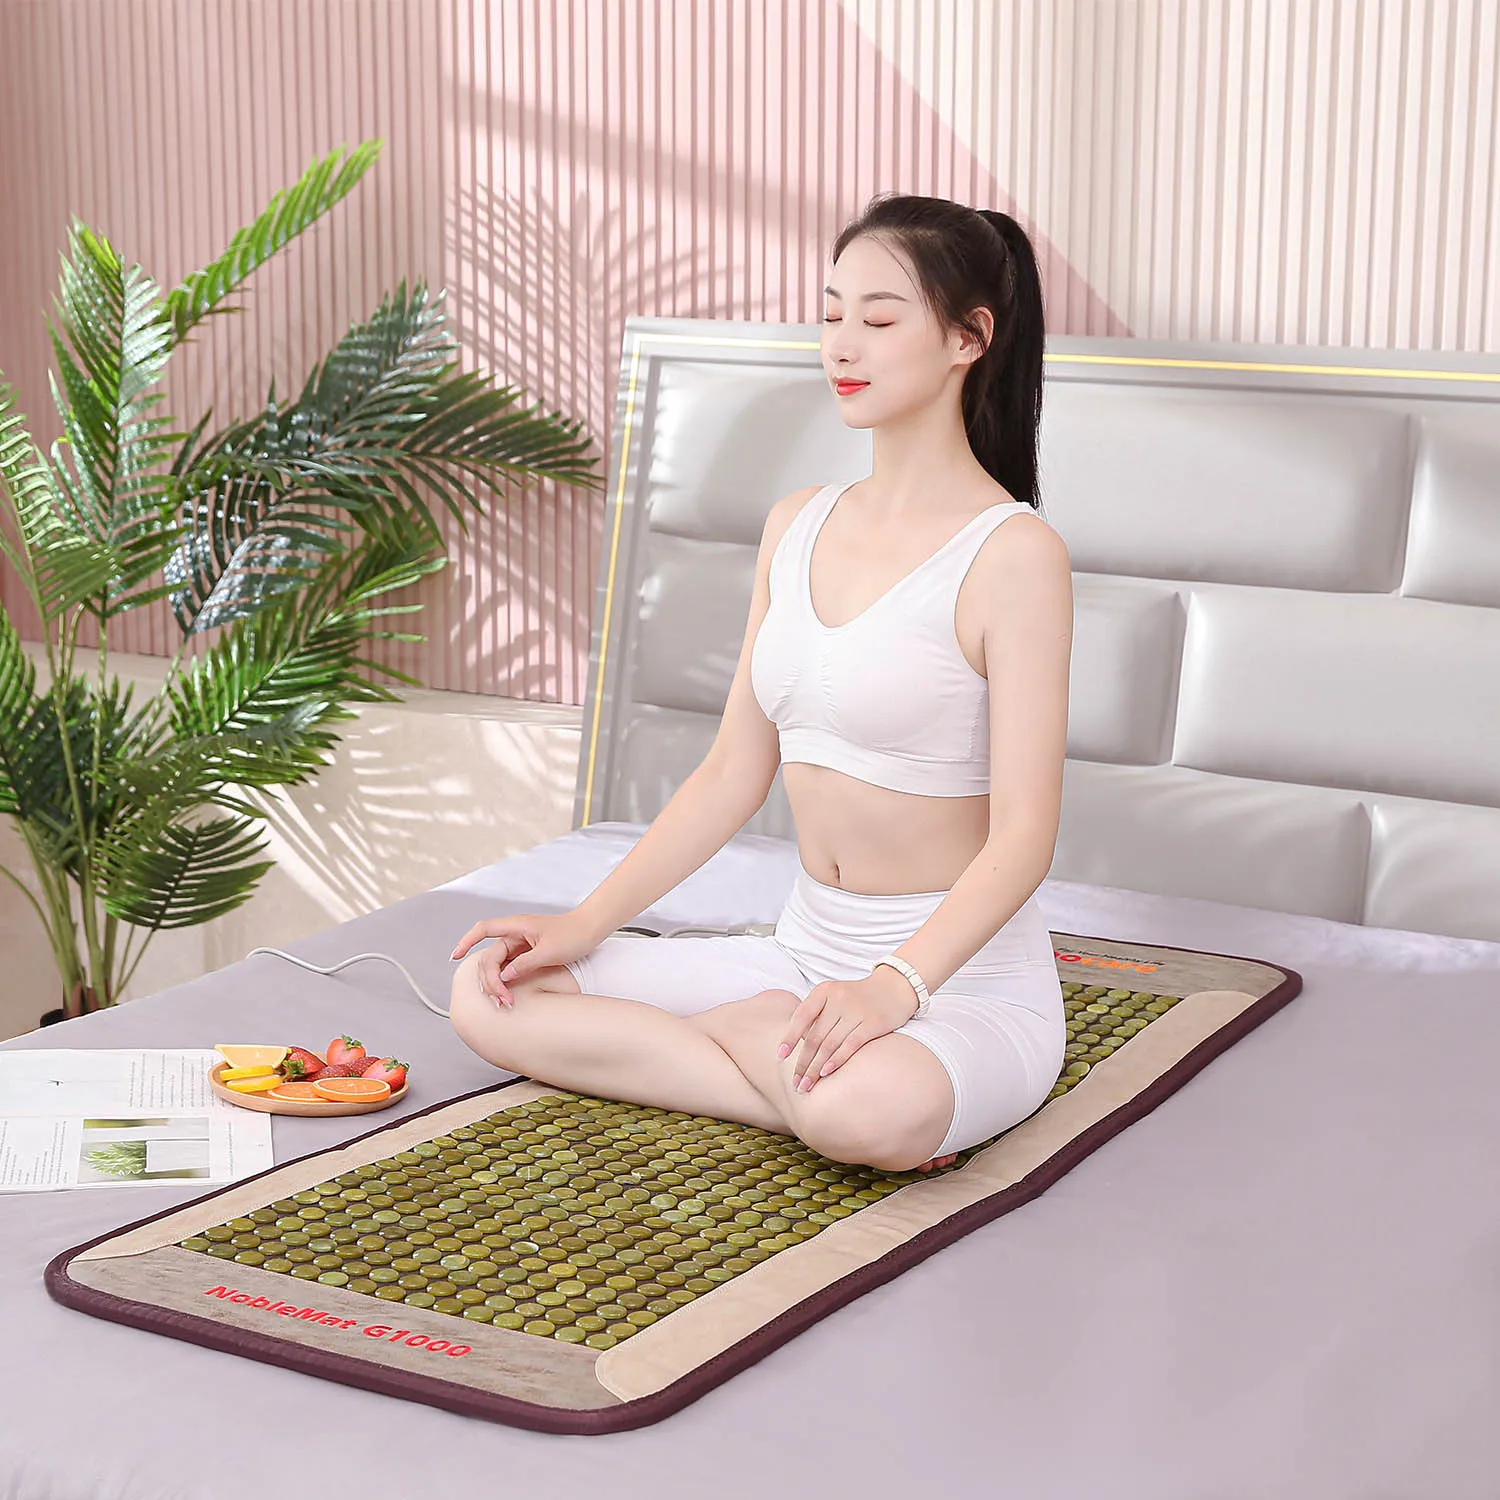 

Fanocare NobleMat G1000 Natural Gemstone Far Infrared Negative Ion Therapy Mat Jade Electric Heating Massage Mattress Pad